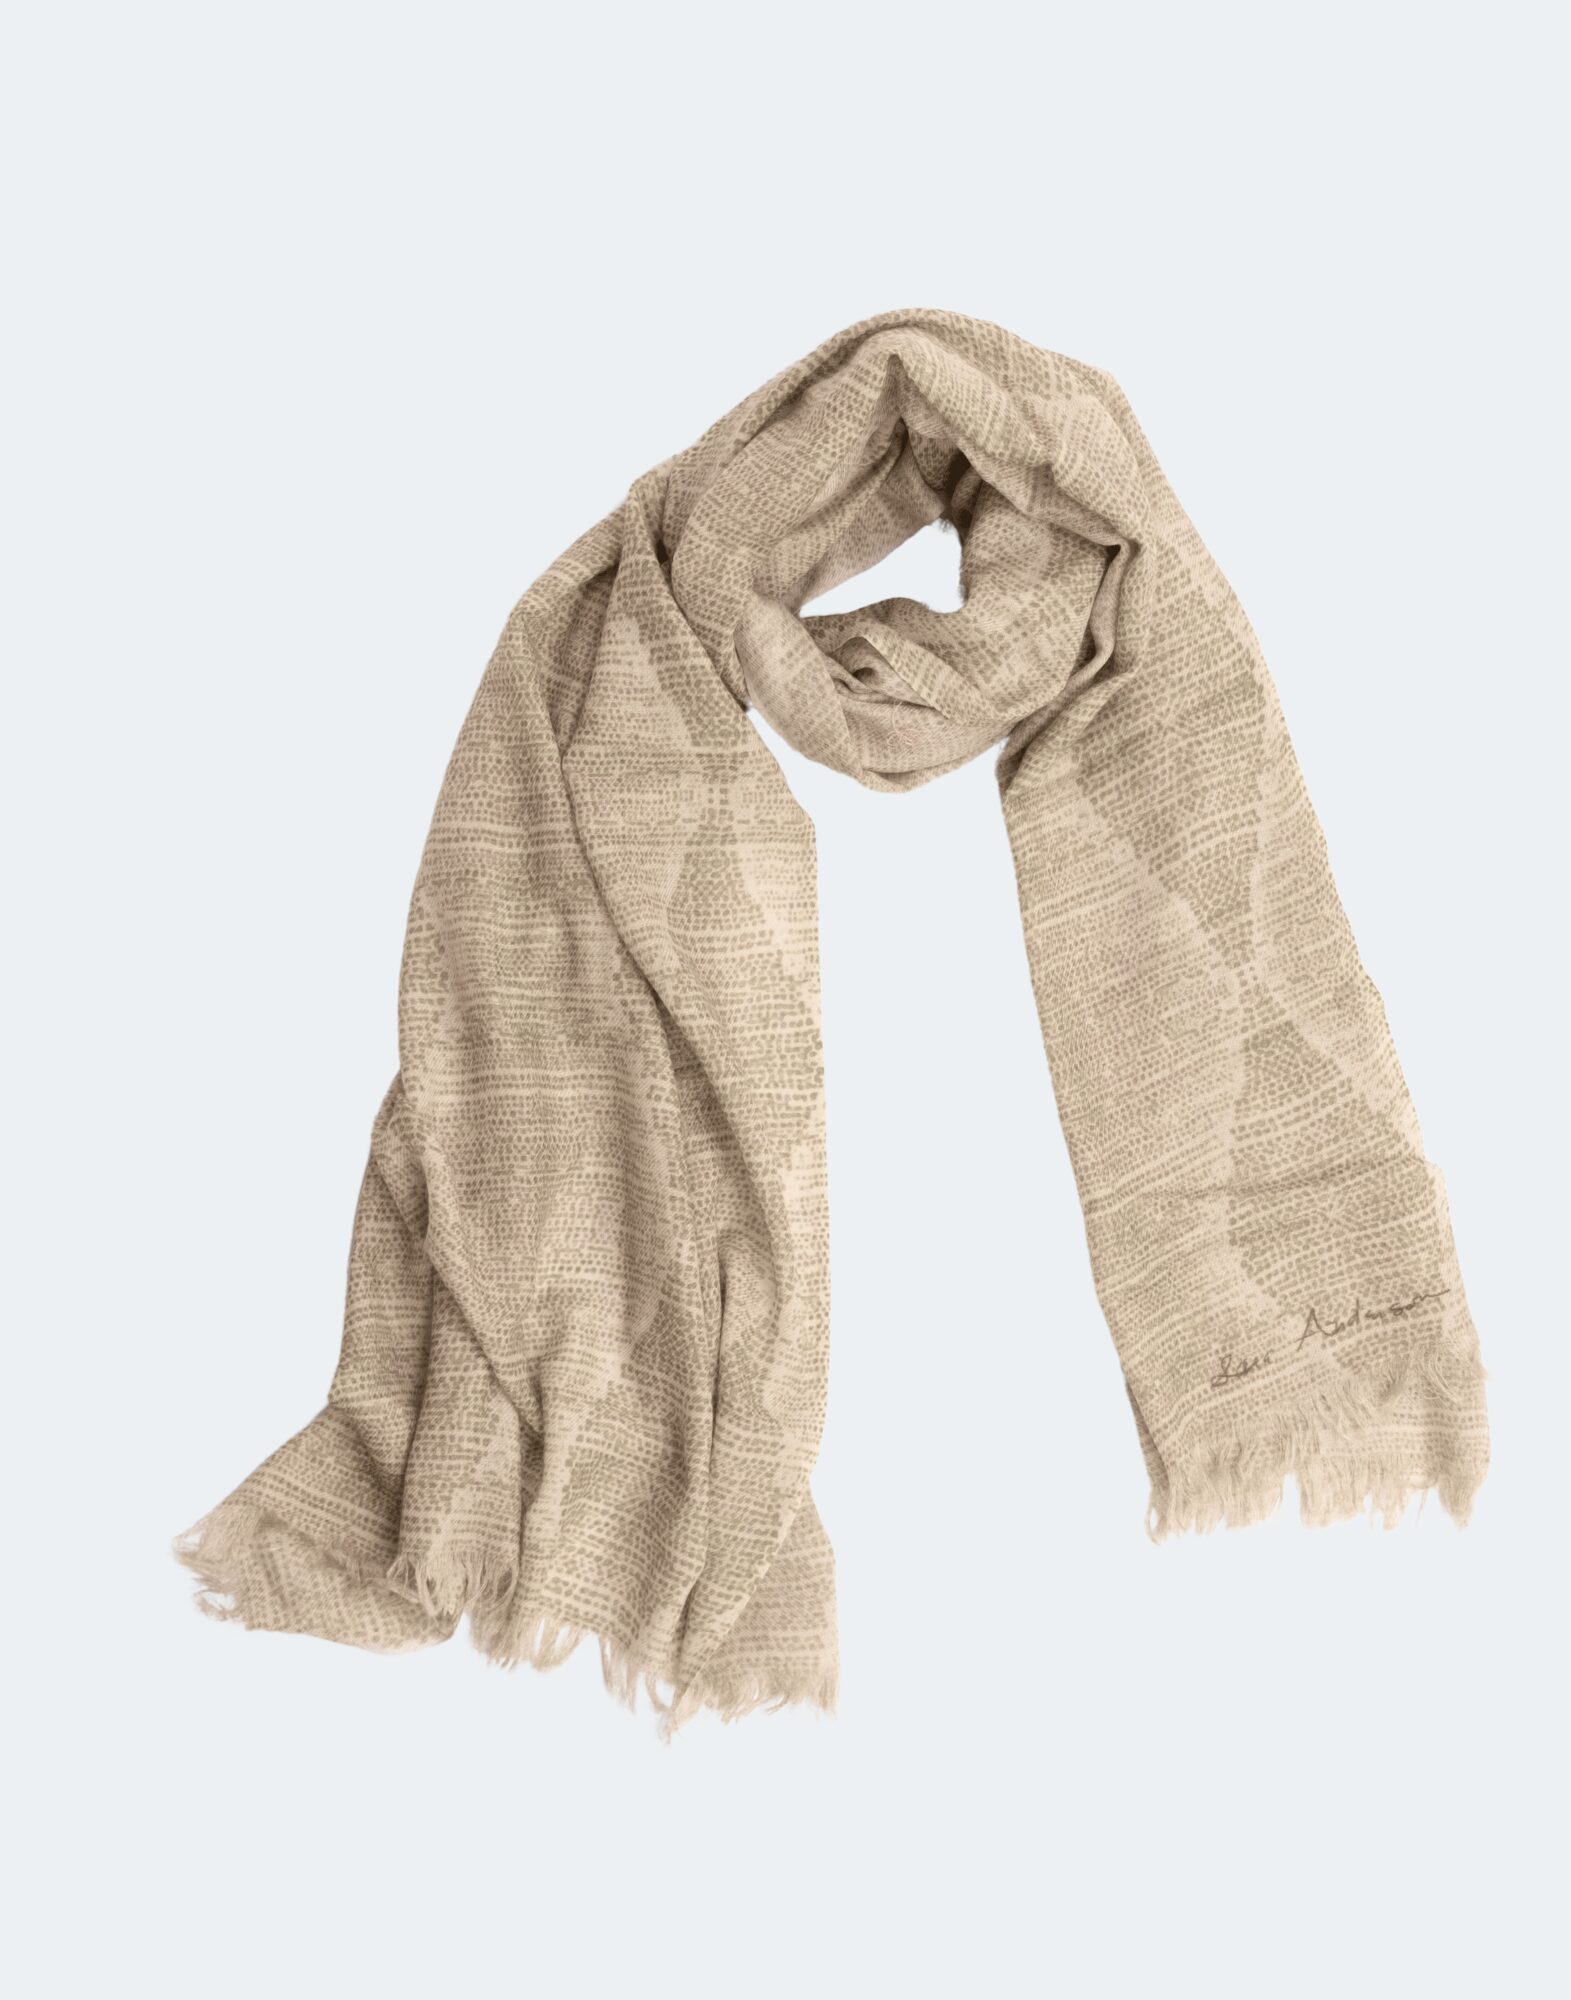 tan patterned scarf